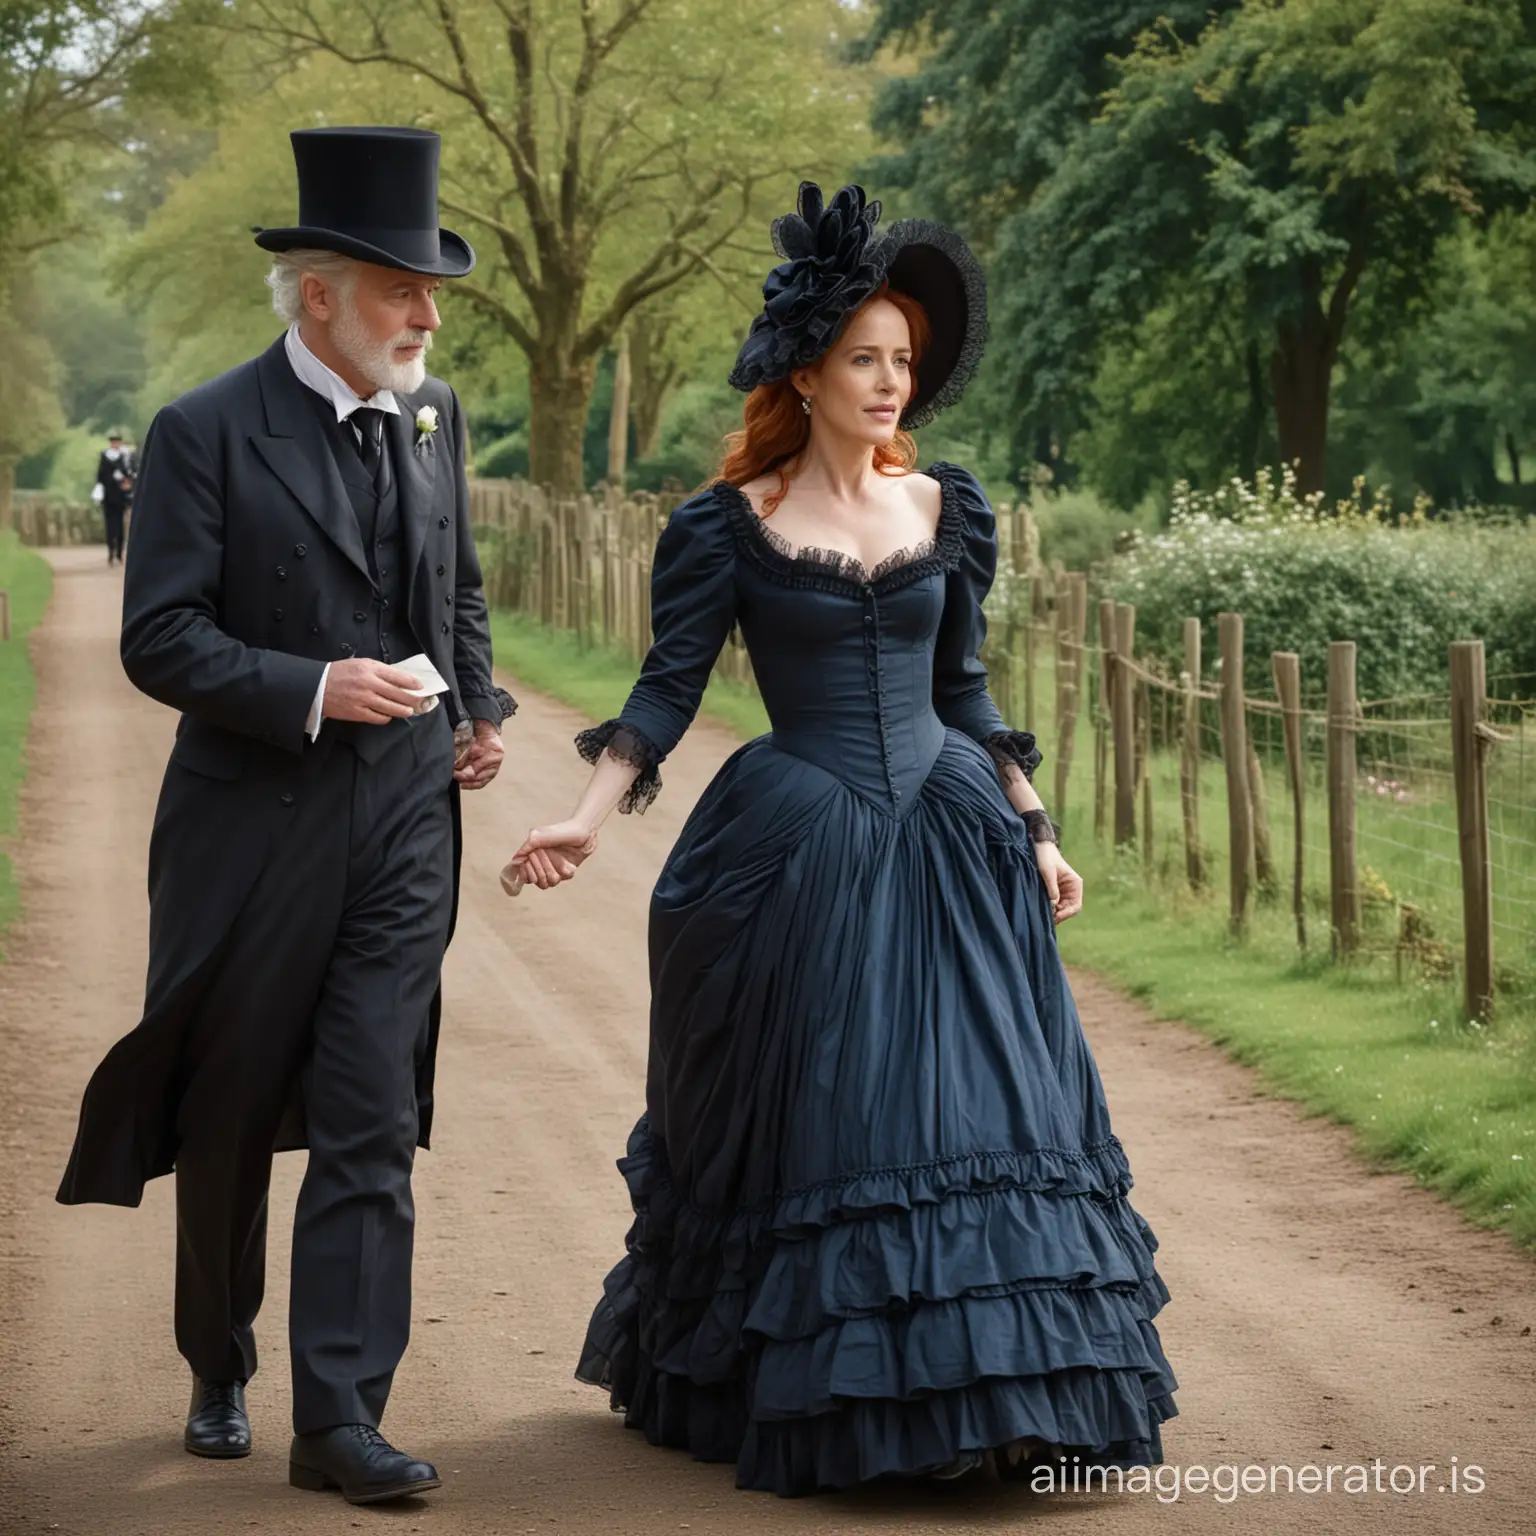 red hair Gillian Anderson wearing a dark blue floor-length loose billowing 1860 victorian crinoline poofy dress with a frilly bonnet walking with an old man dressed into a black victorian suit who seems to be her newlywed husband
